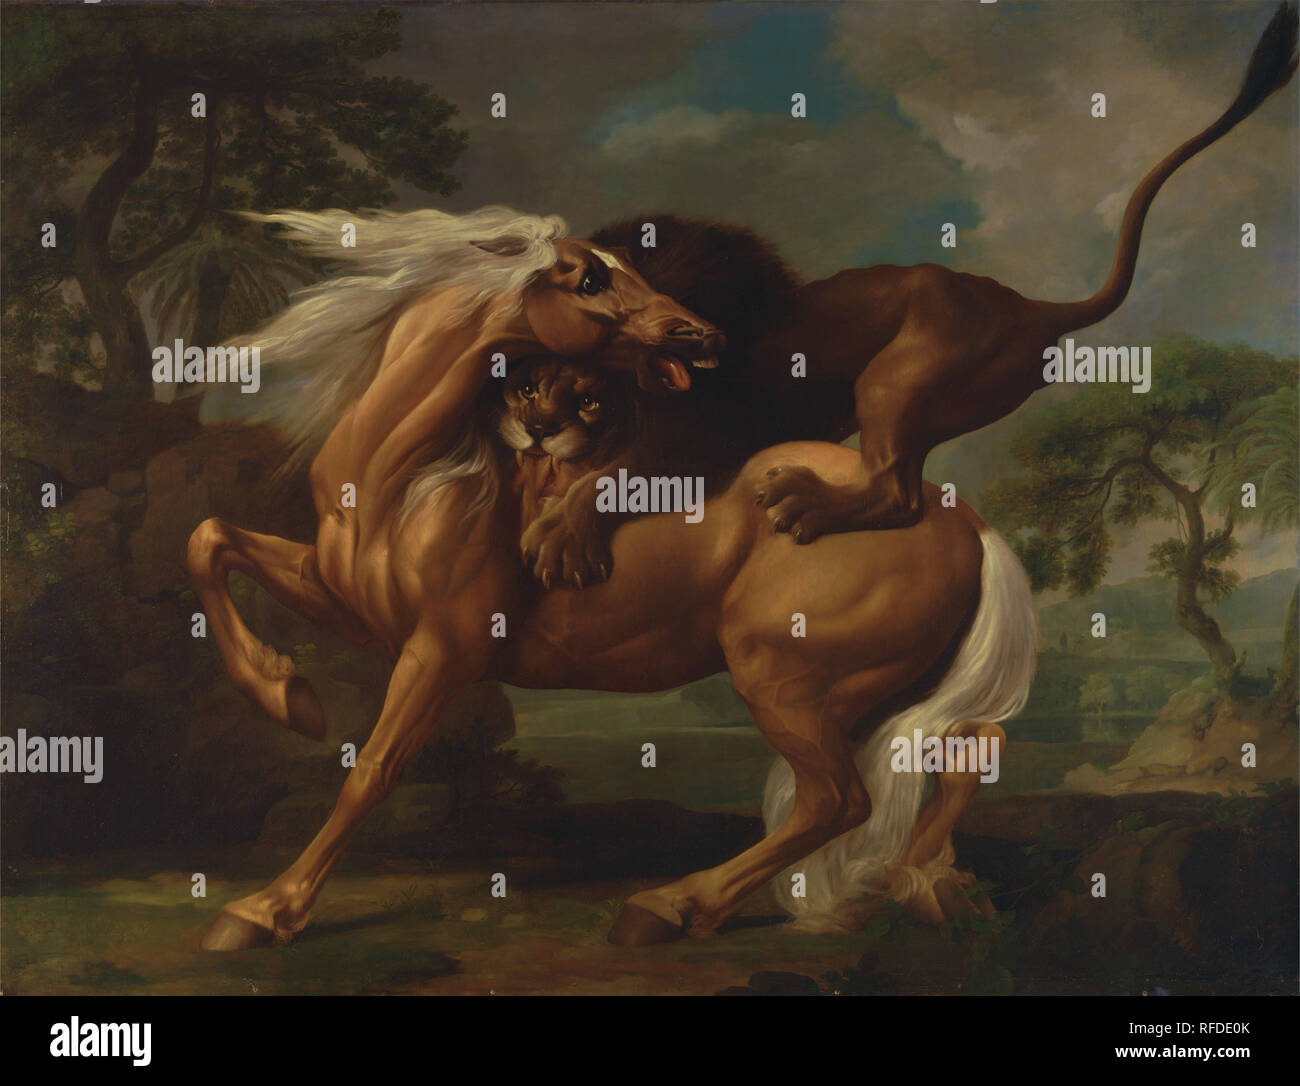 A Lion Attacking a Horse. Date/Period: 1762. Painting. Oil on canvas. Height: 2,438 mm (95.98 in); Width: 3,327 mm (10.91 ft). Author: George Stubbs. Stock Photo